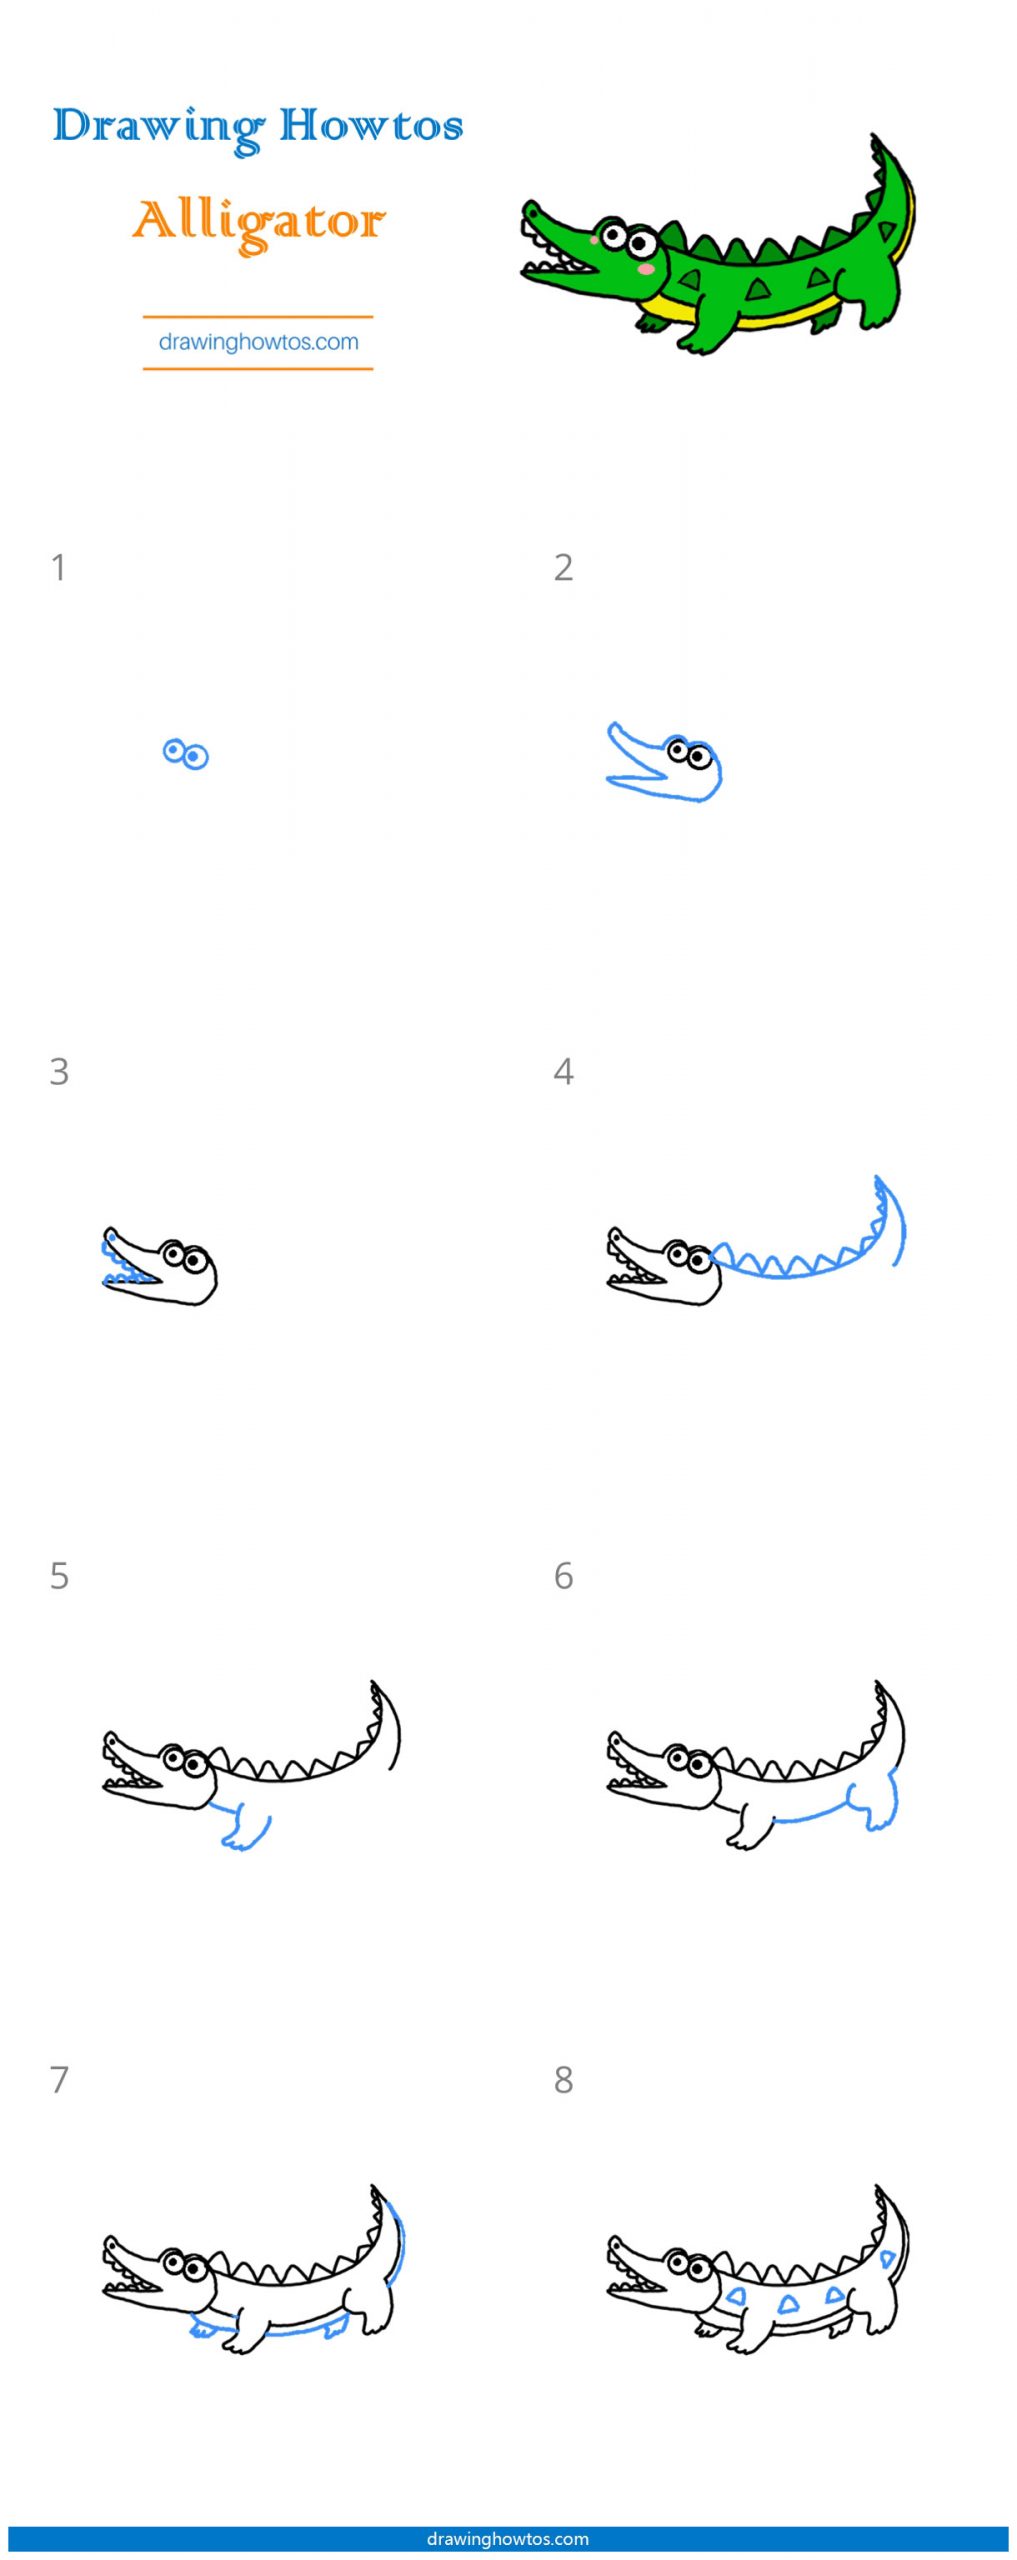 How to Draw an Alligator Step by Step Easy Drawing Guides Drawing